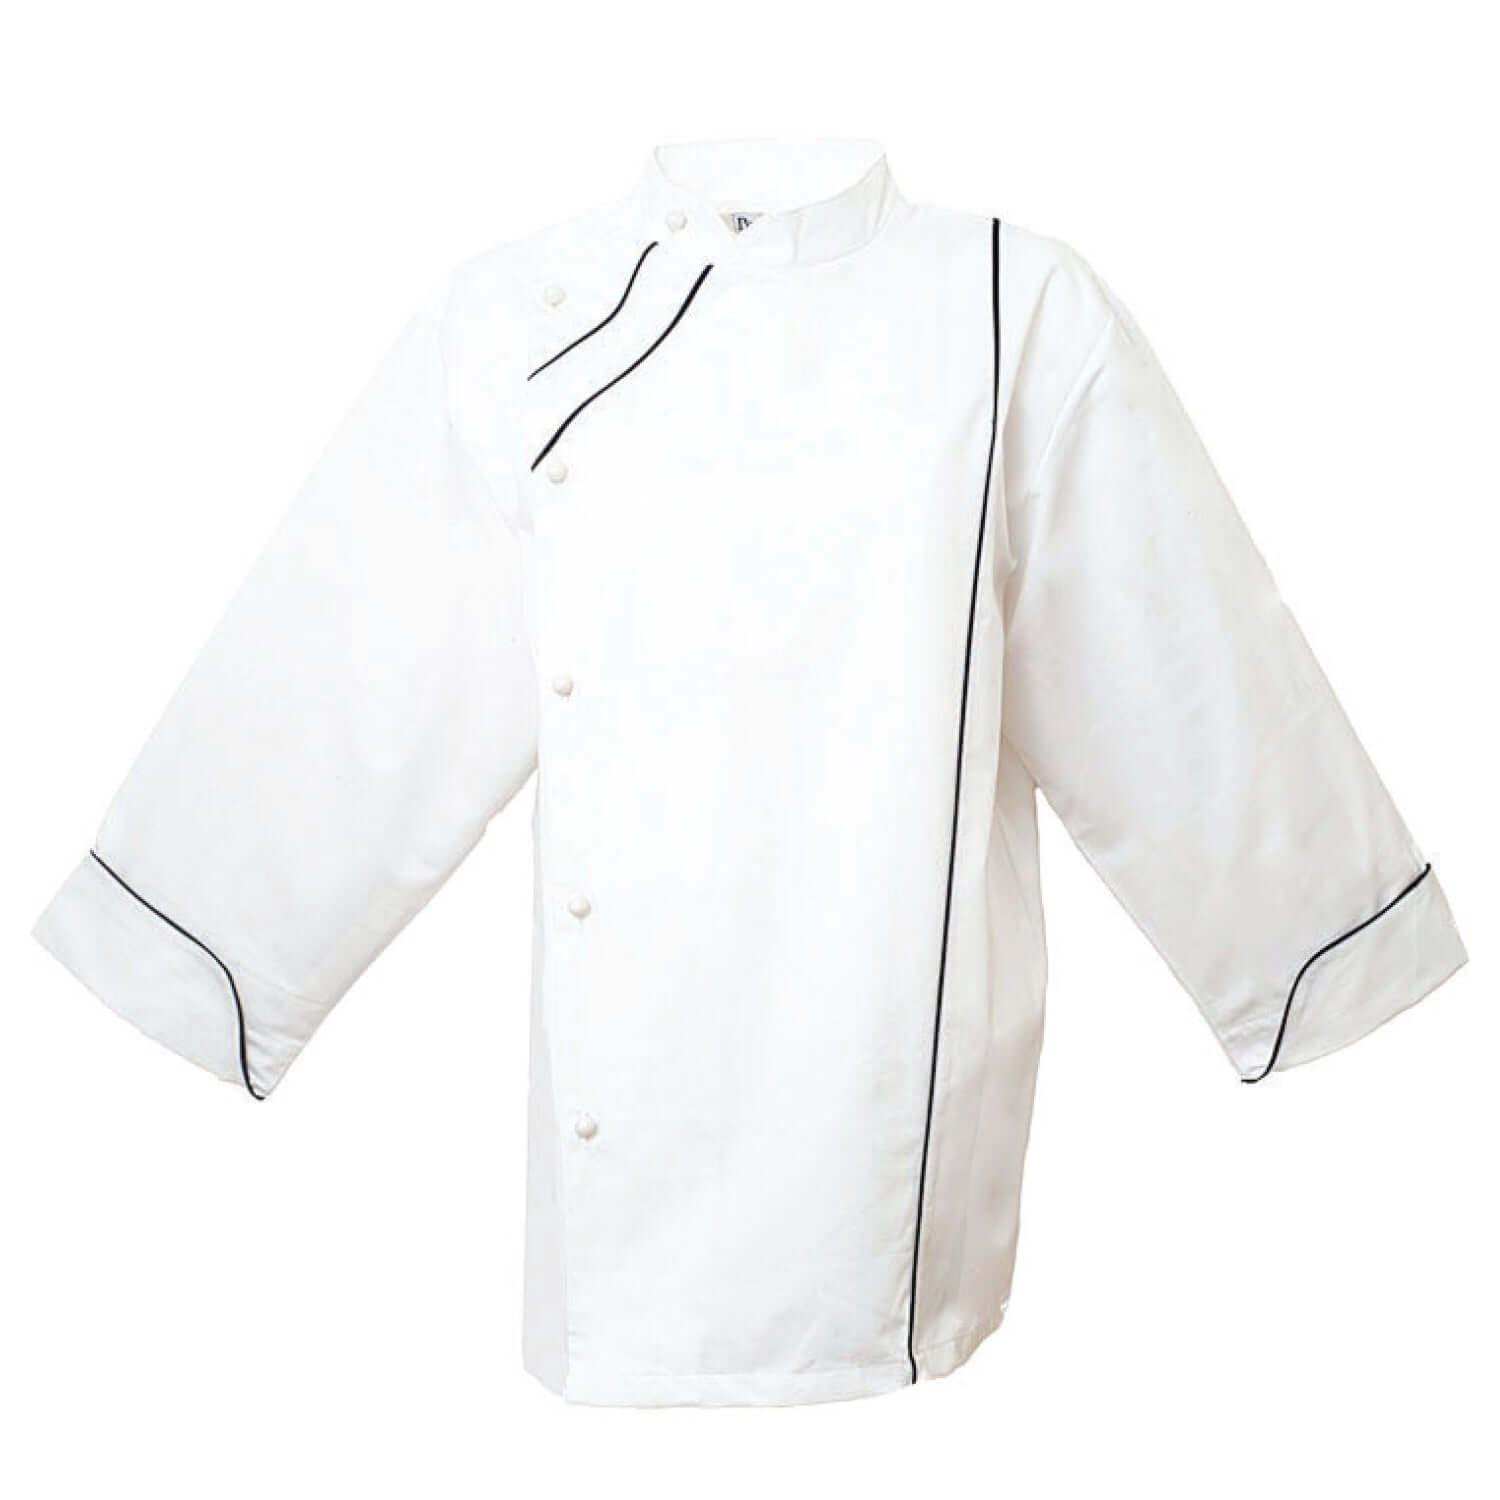 Pegasus White Long Sleeve French Cuff Chef Jackets with Black Piping